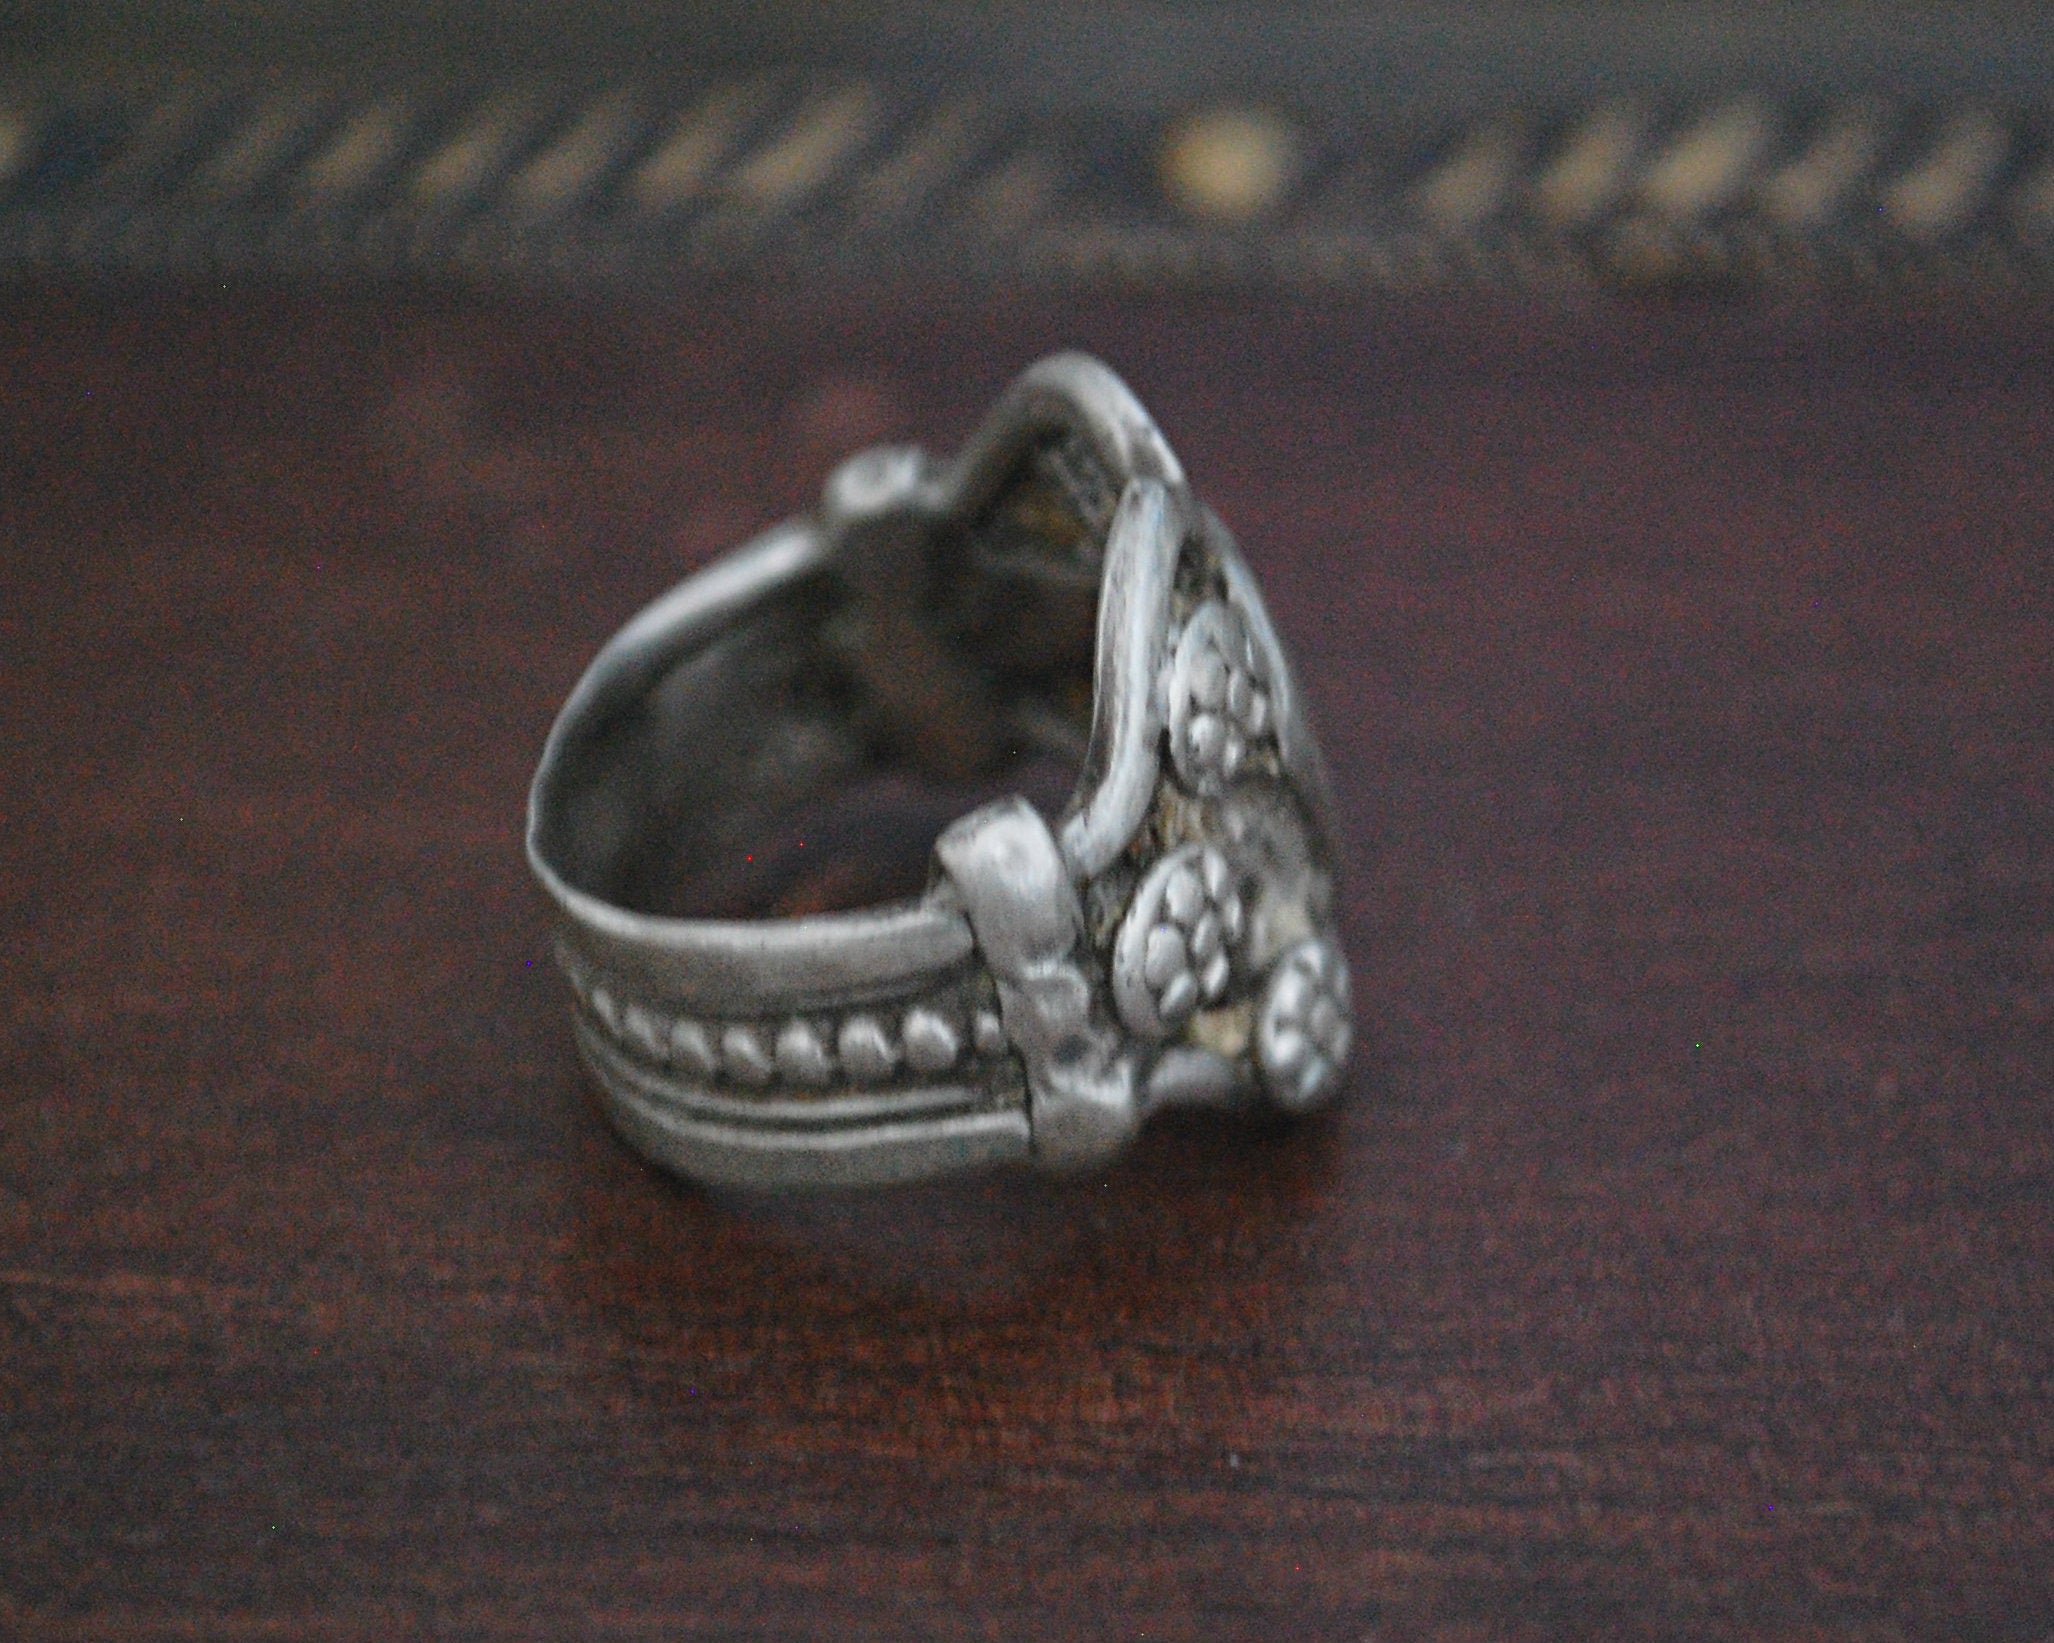 Old Rajasthani Heart Ring - Size 6.5